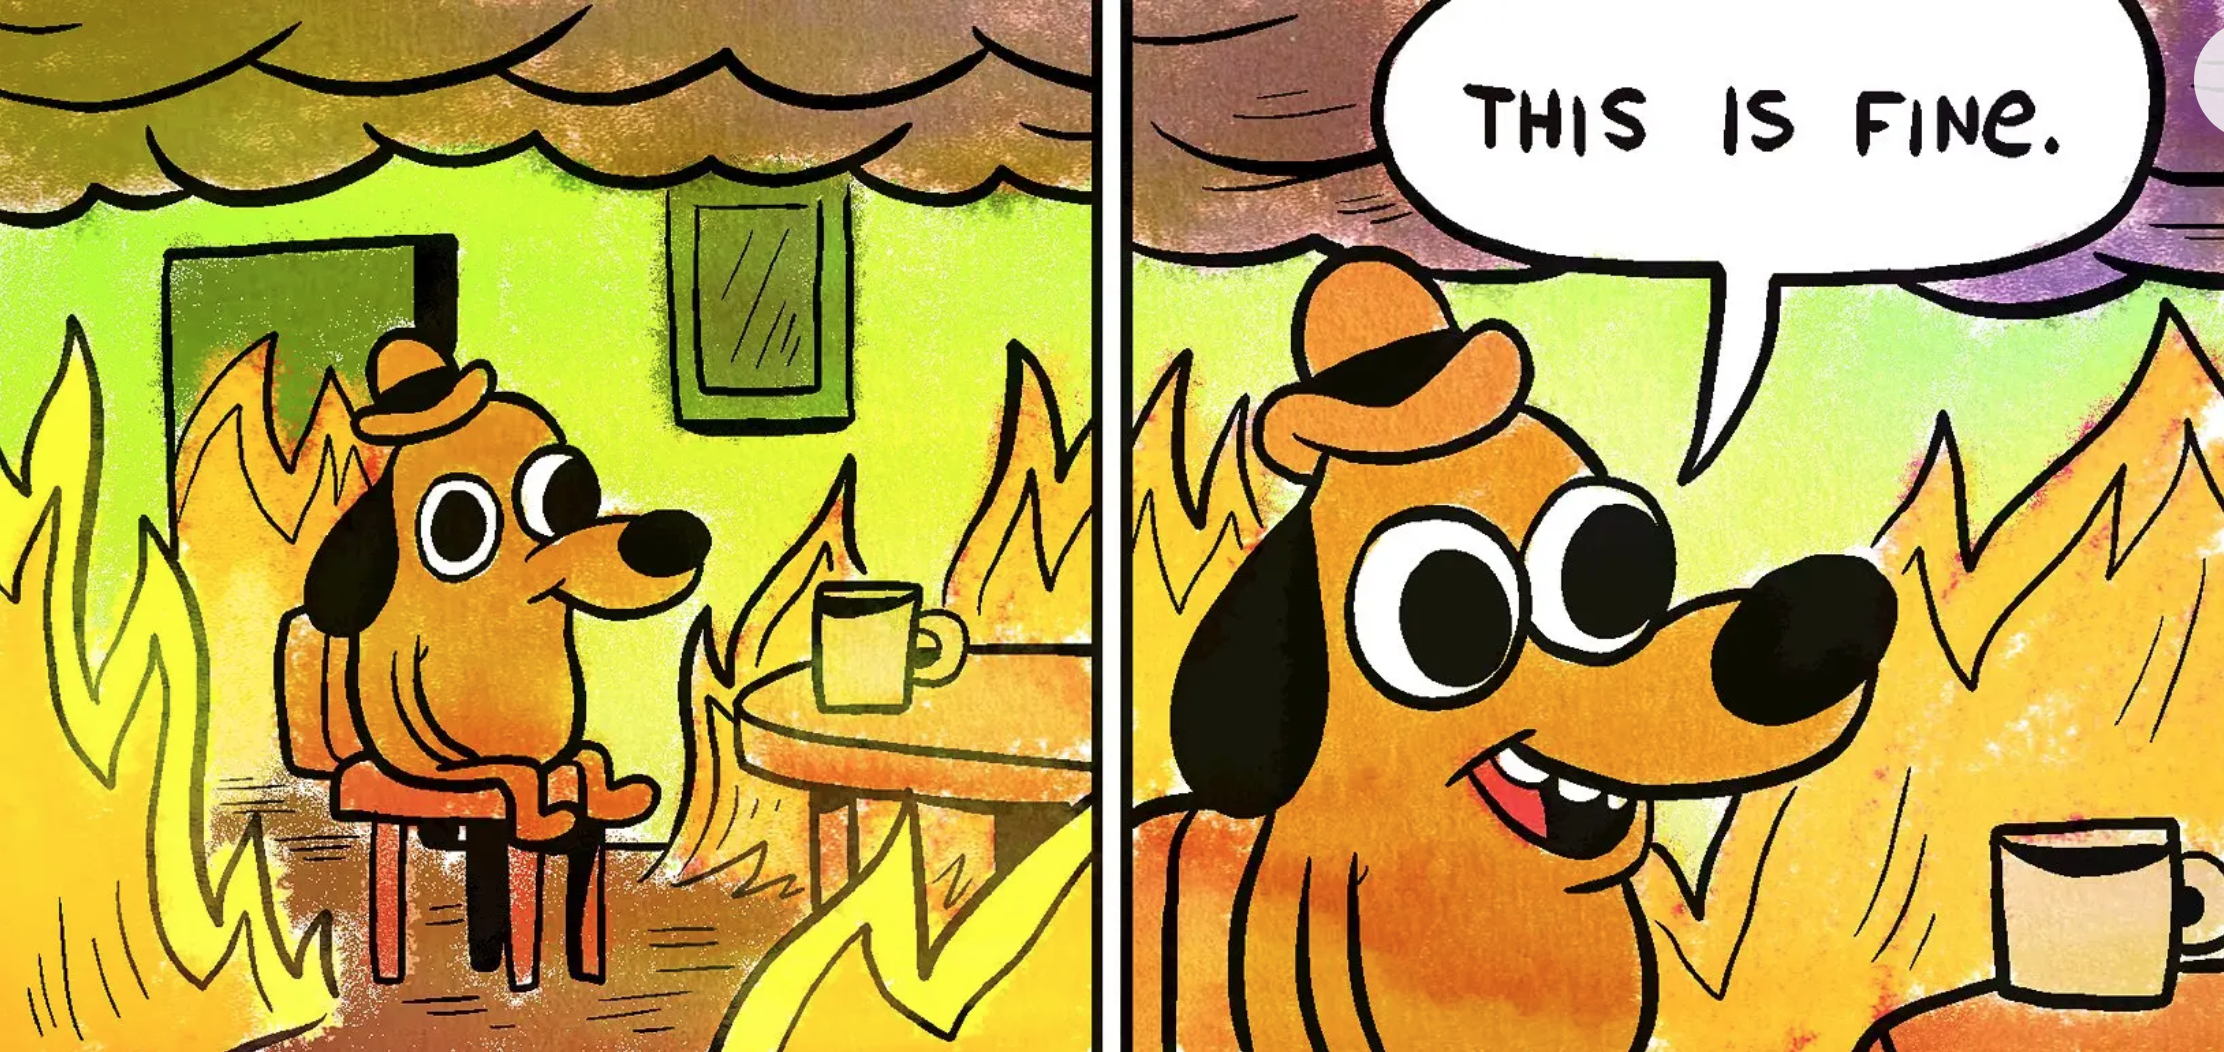 this is fine meme of dog in hat sitting at table surrounded by flames saying this is fine